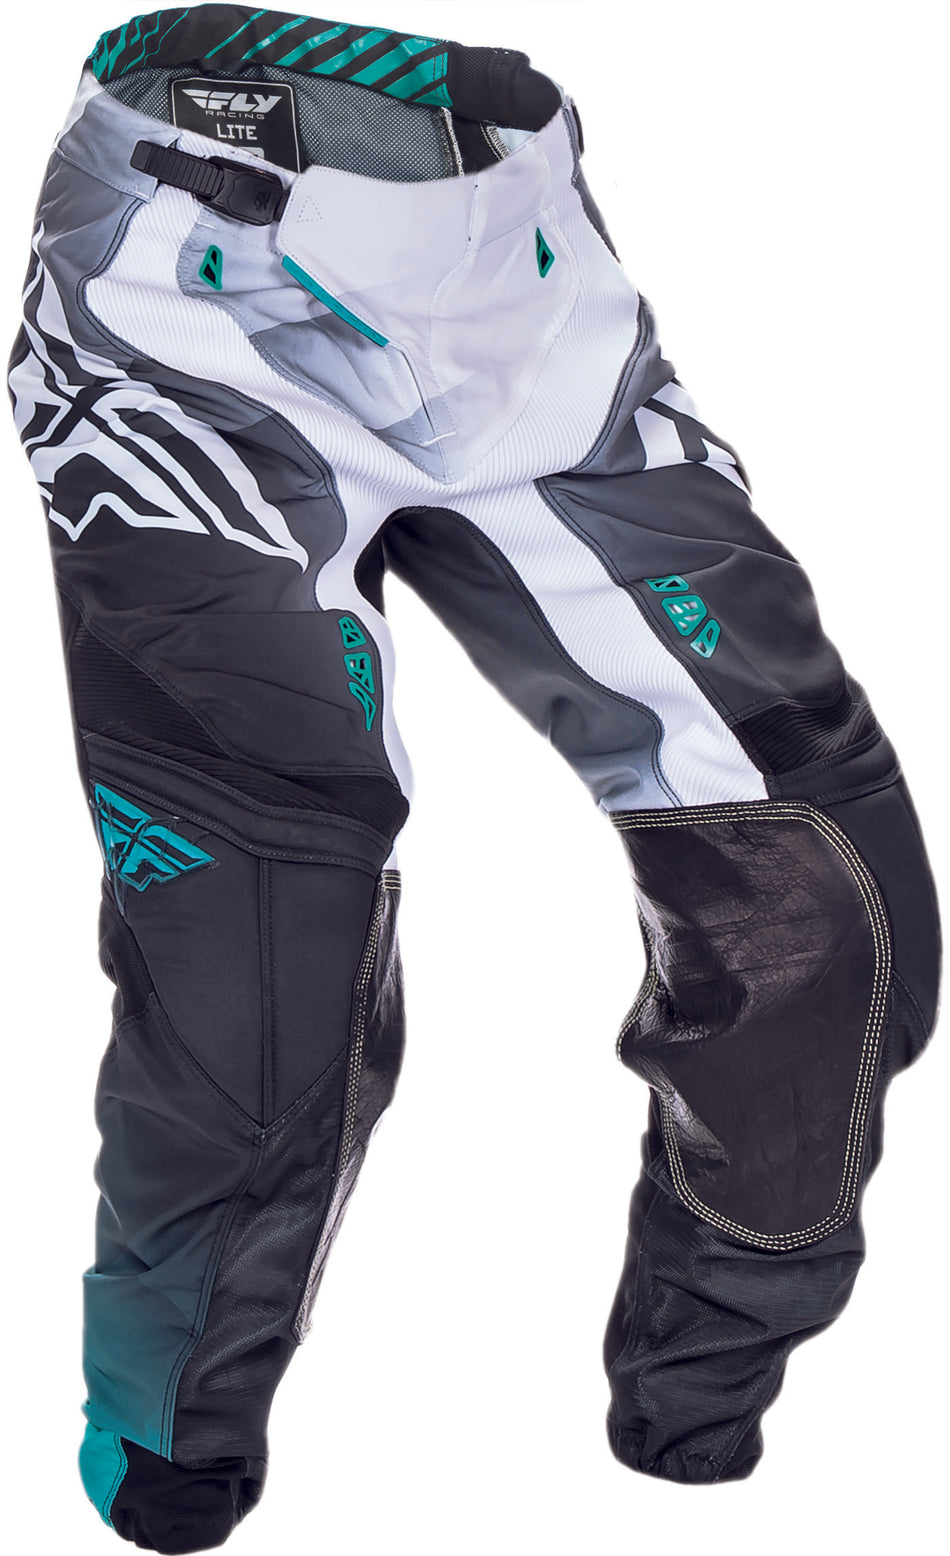 FLY RACING Lite Hydrogen Pant Black/White/Teal Sz 28s 370-73028S